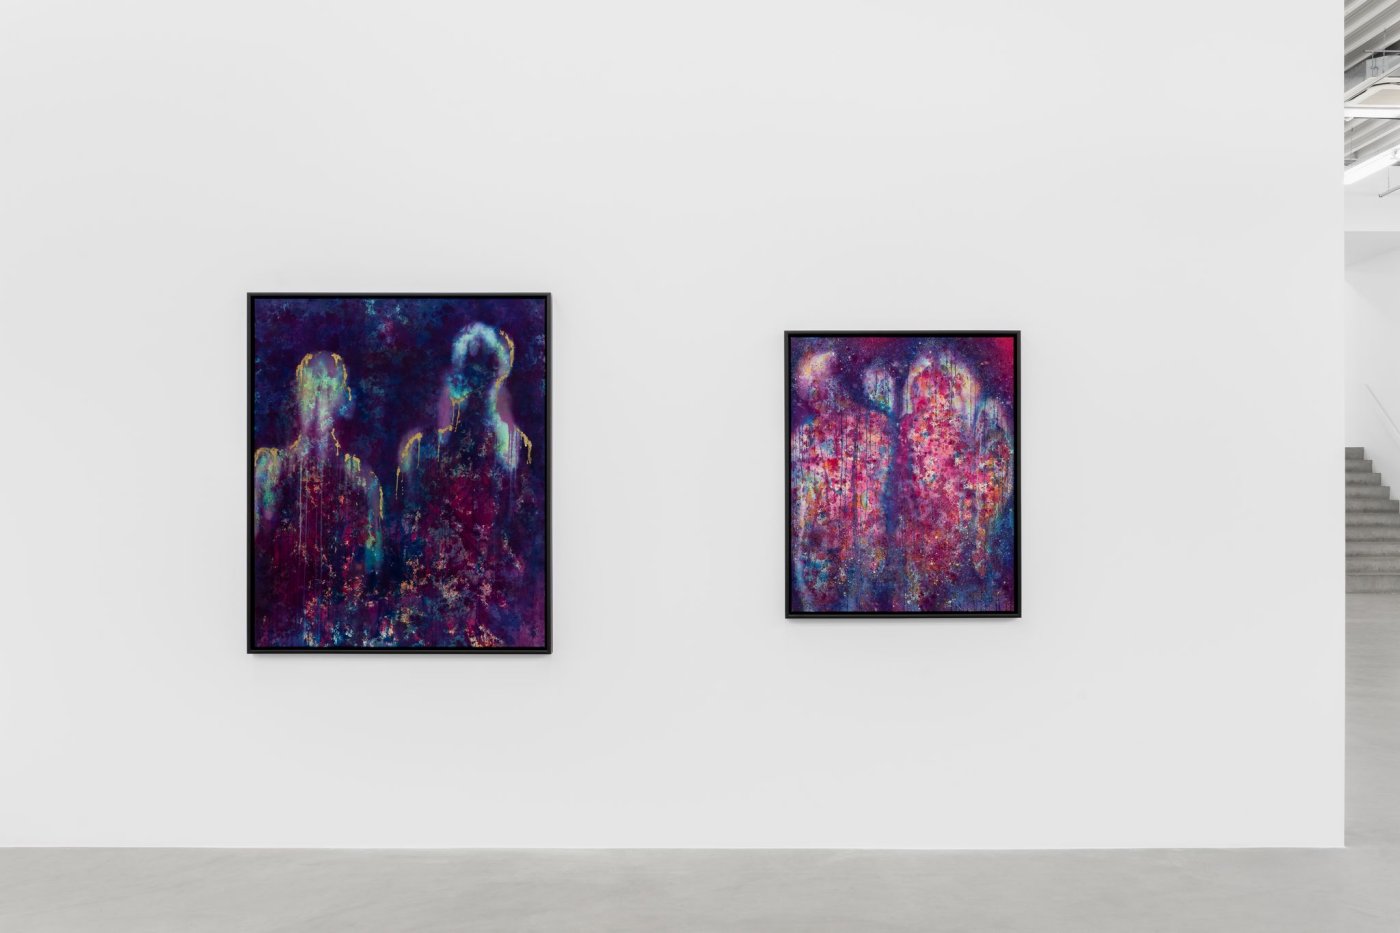 Installation image for Alexis McGrigg: In The Beloved, at Almine Rech